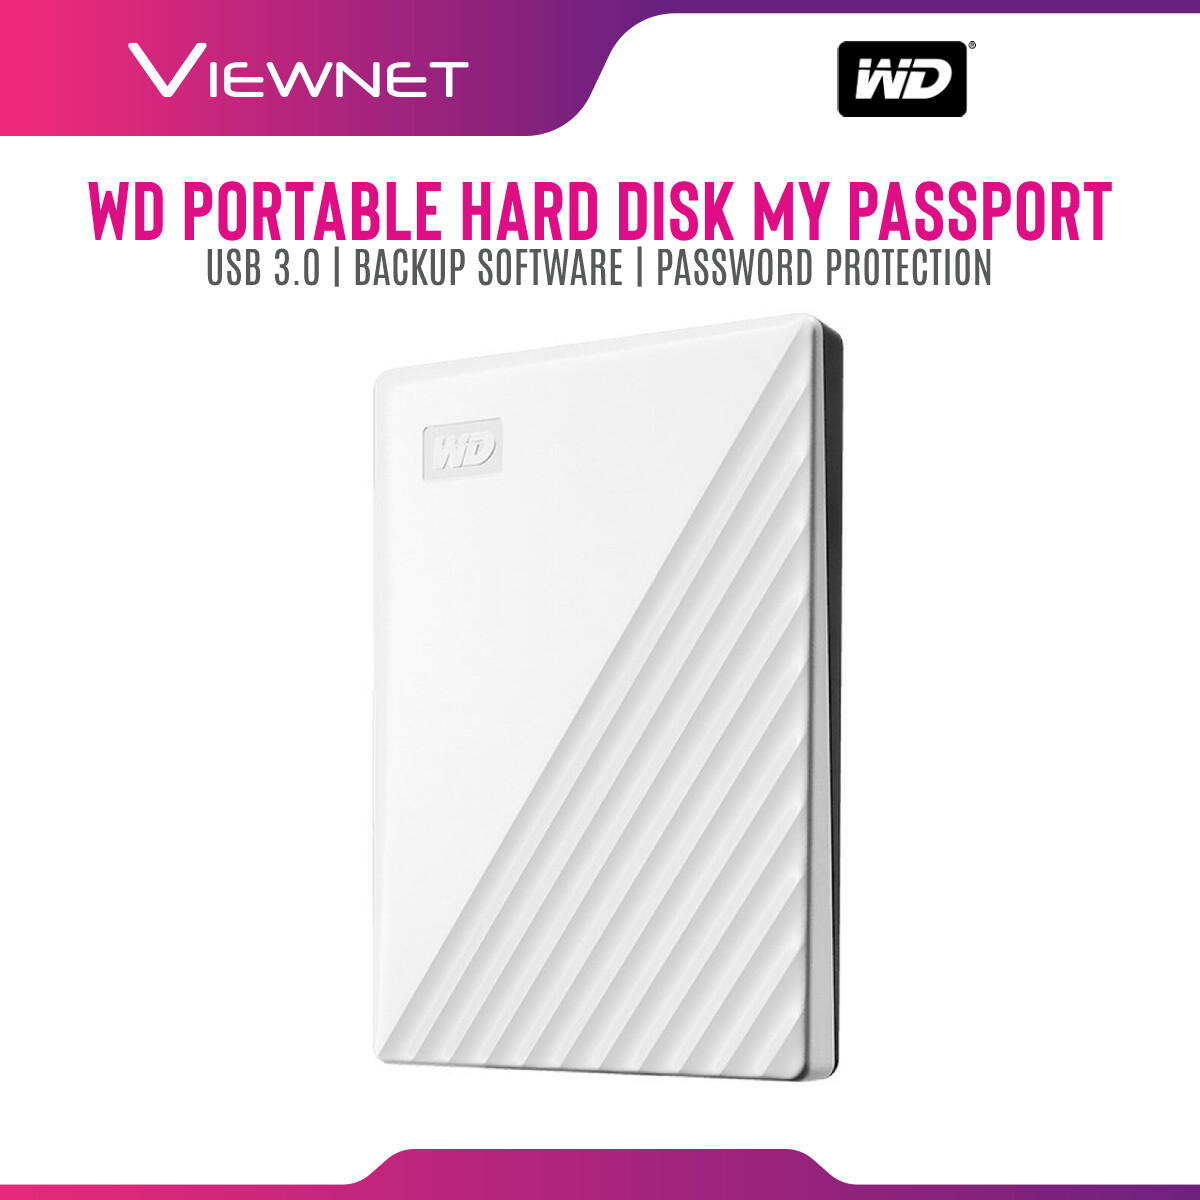 WD Western Digital My Passport 1TB / 2TB / 4TB / 5TB Slim Portable External Hard Disk USB 3.0 With WD Backup Software & Password Protection